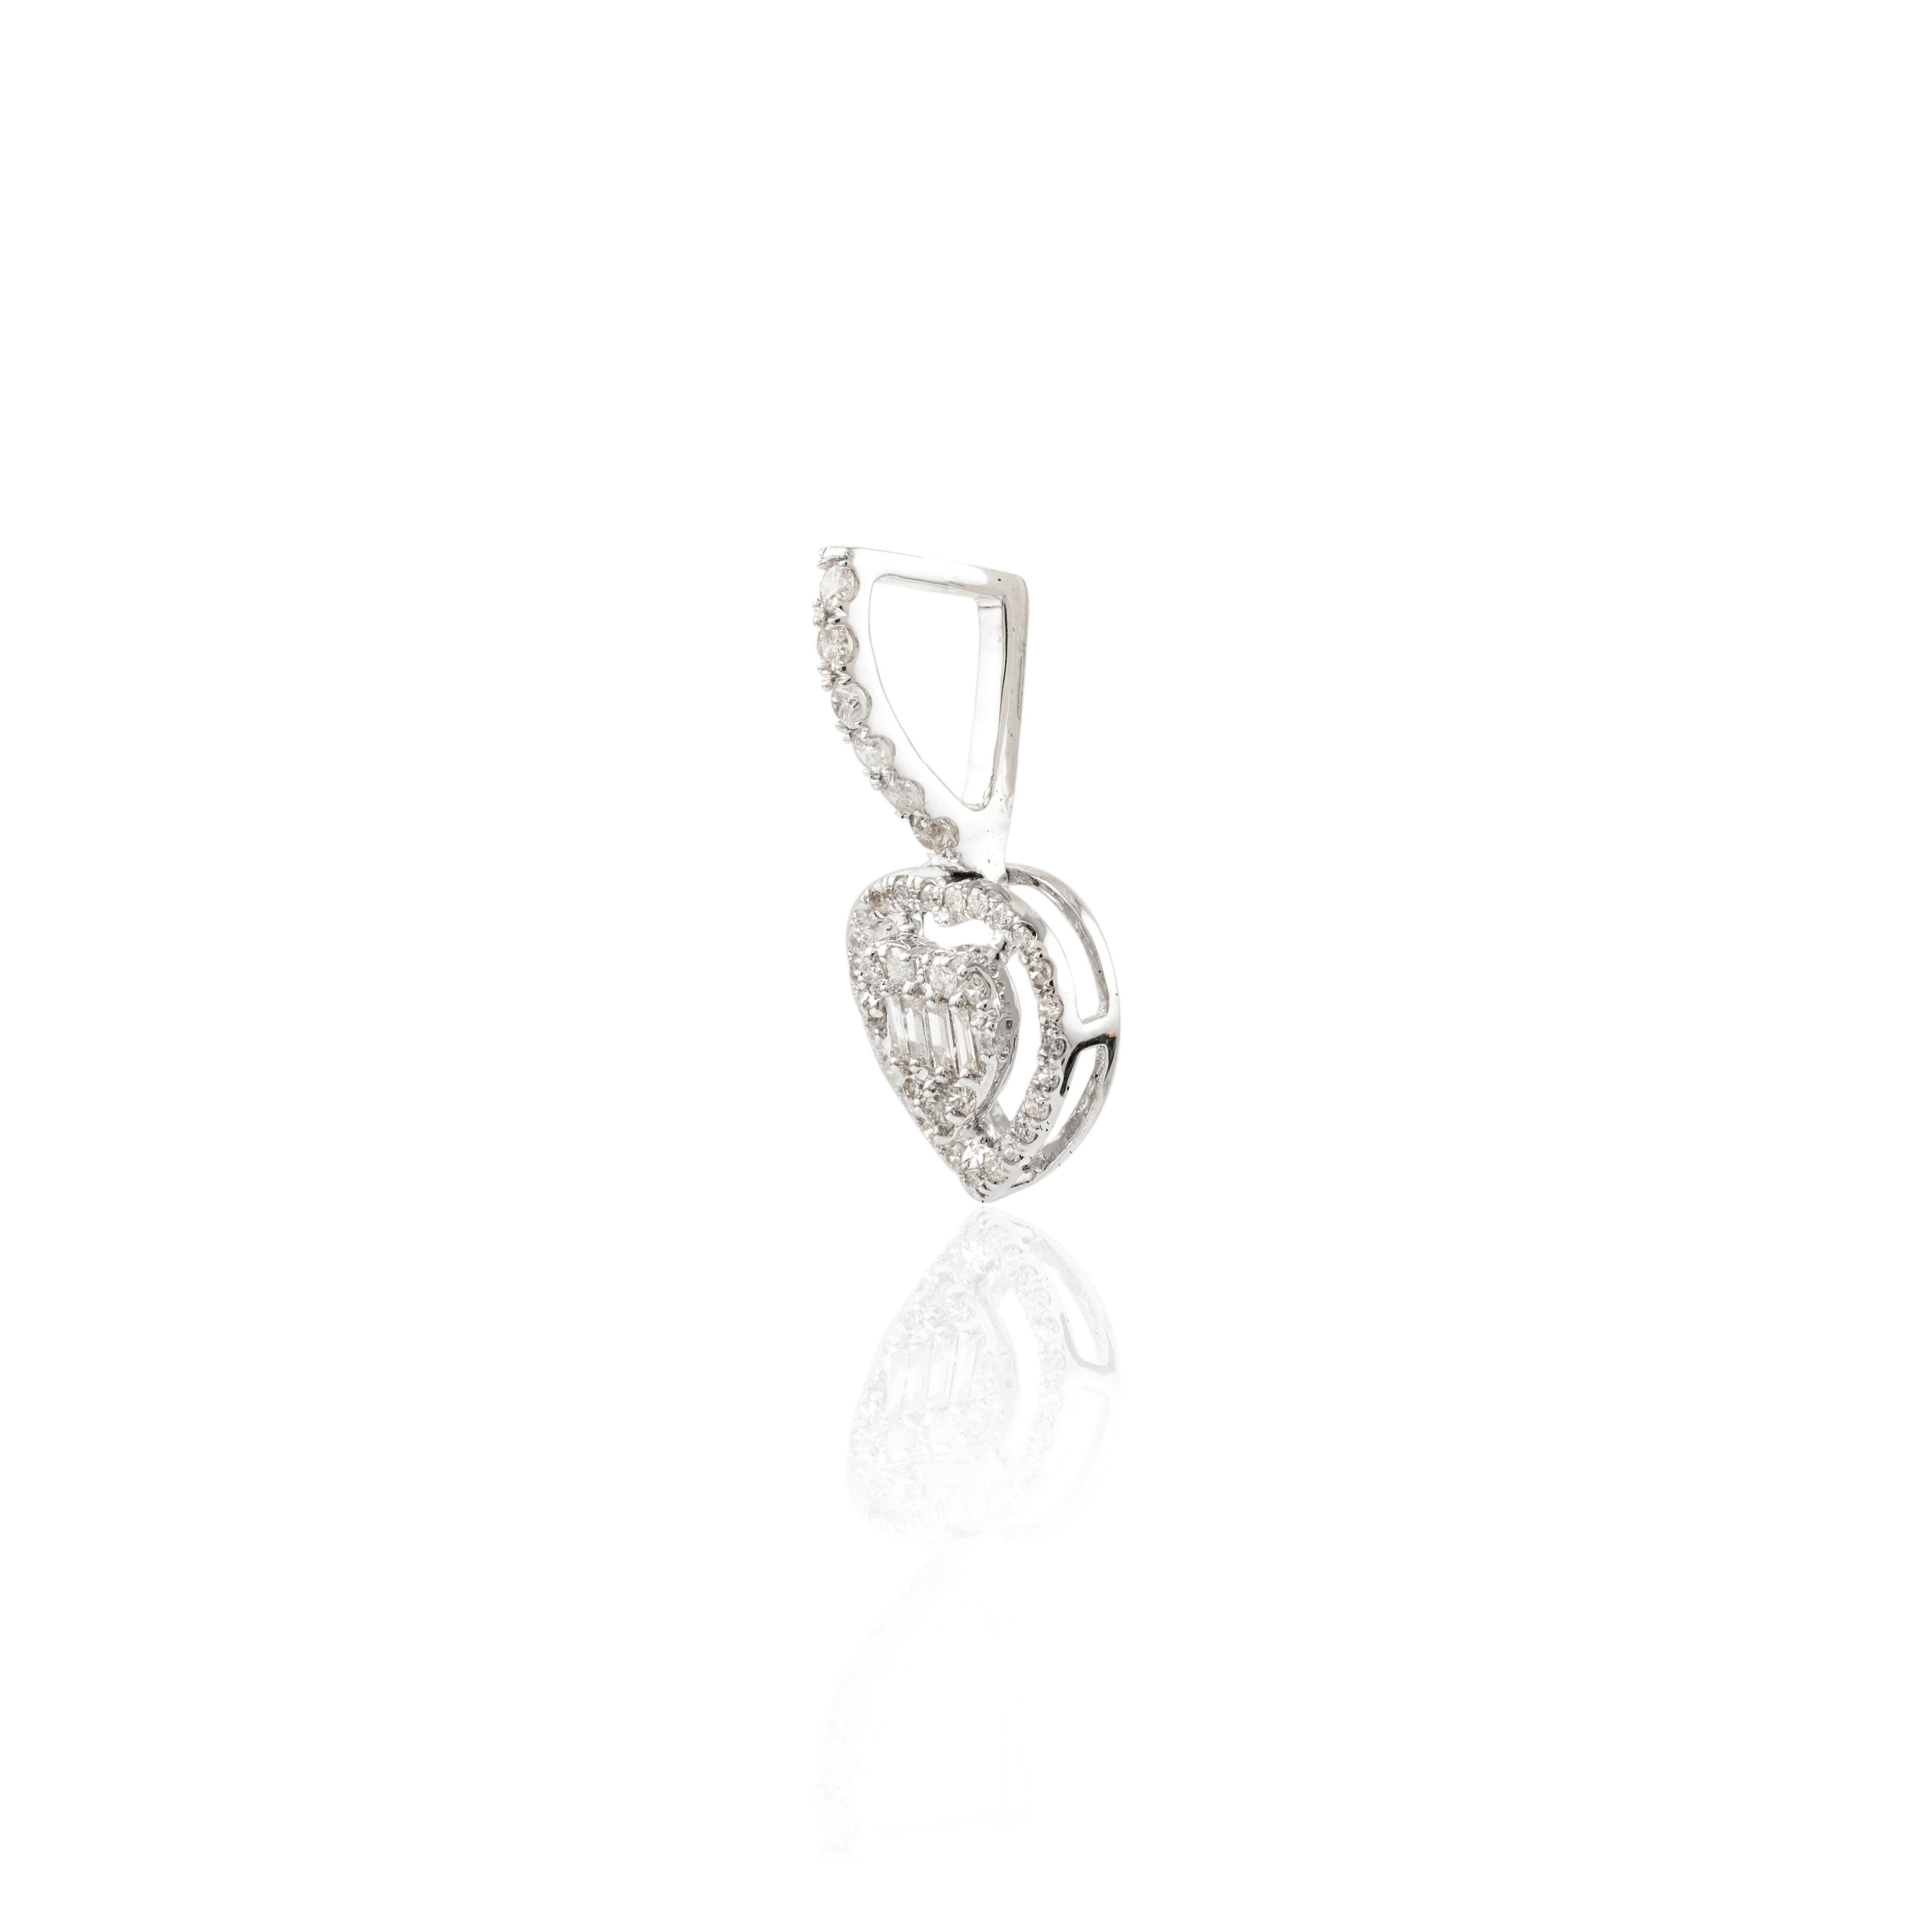 Mixed Cut Heart Diamond Pendant 18k Solid White Gold, Fine Jewelry Bride To Be Gift For Sale